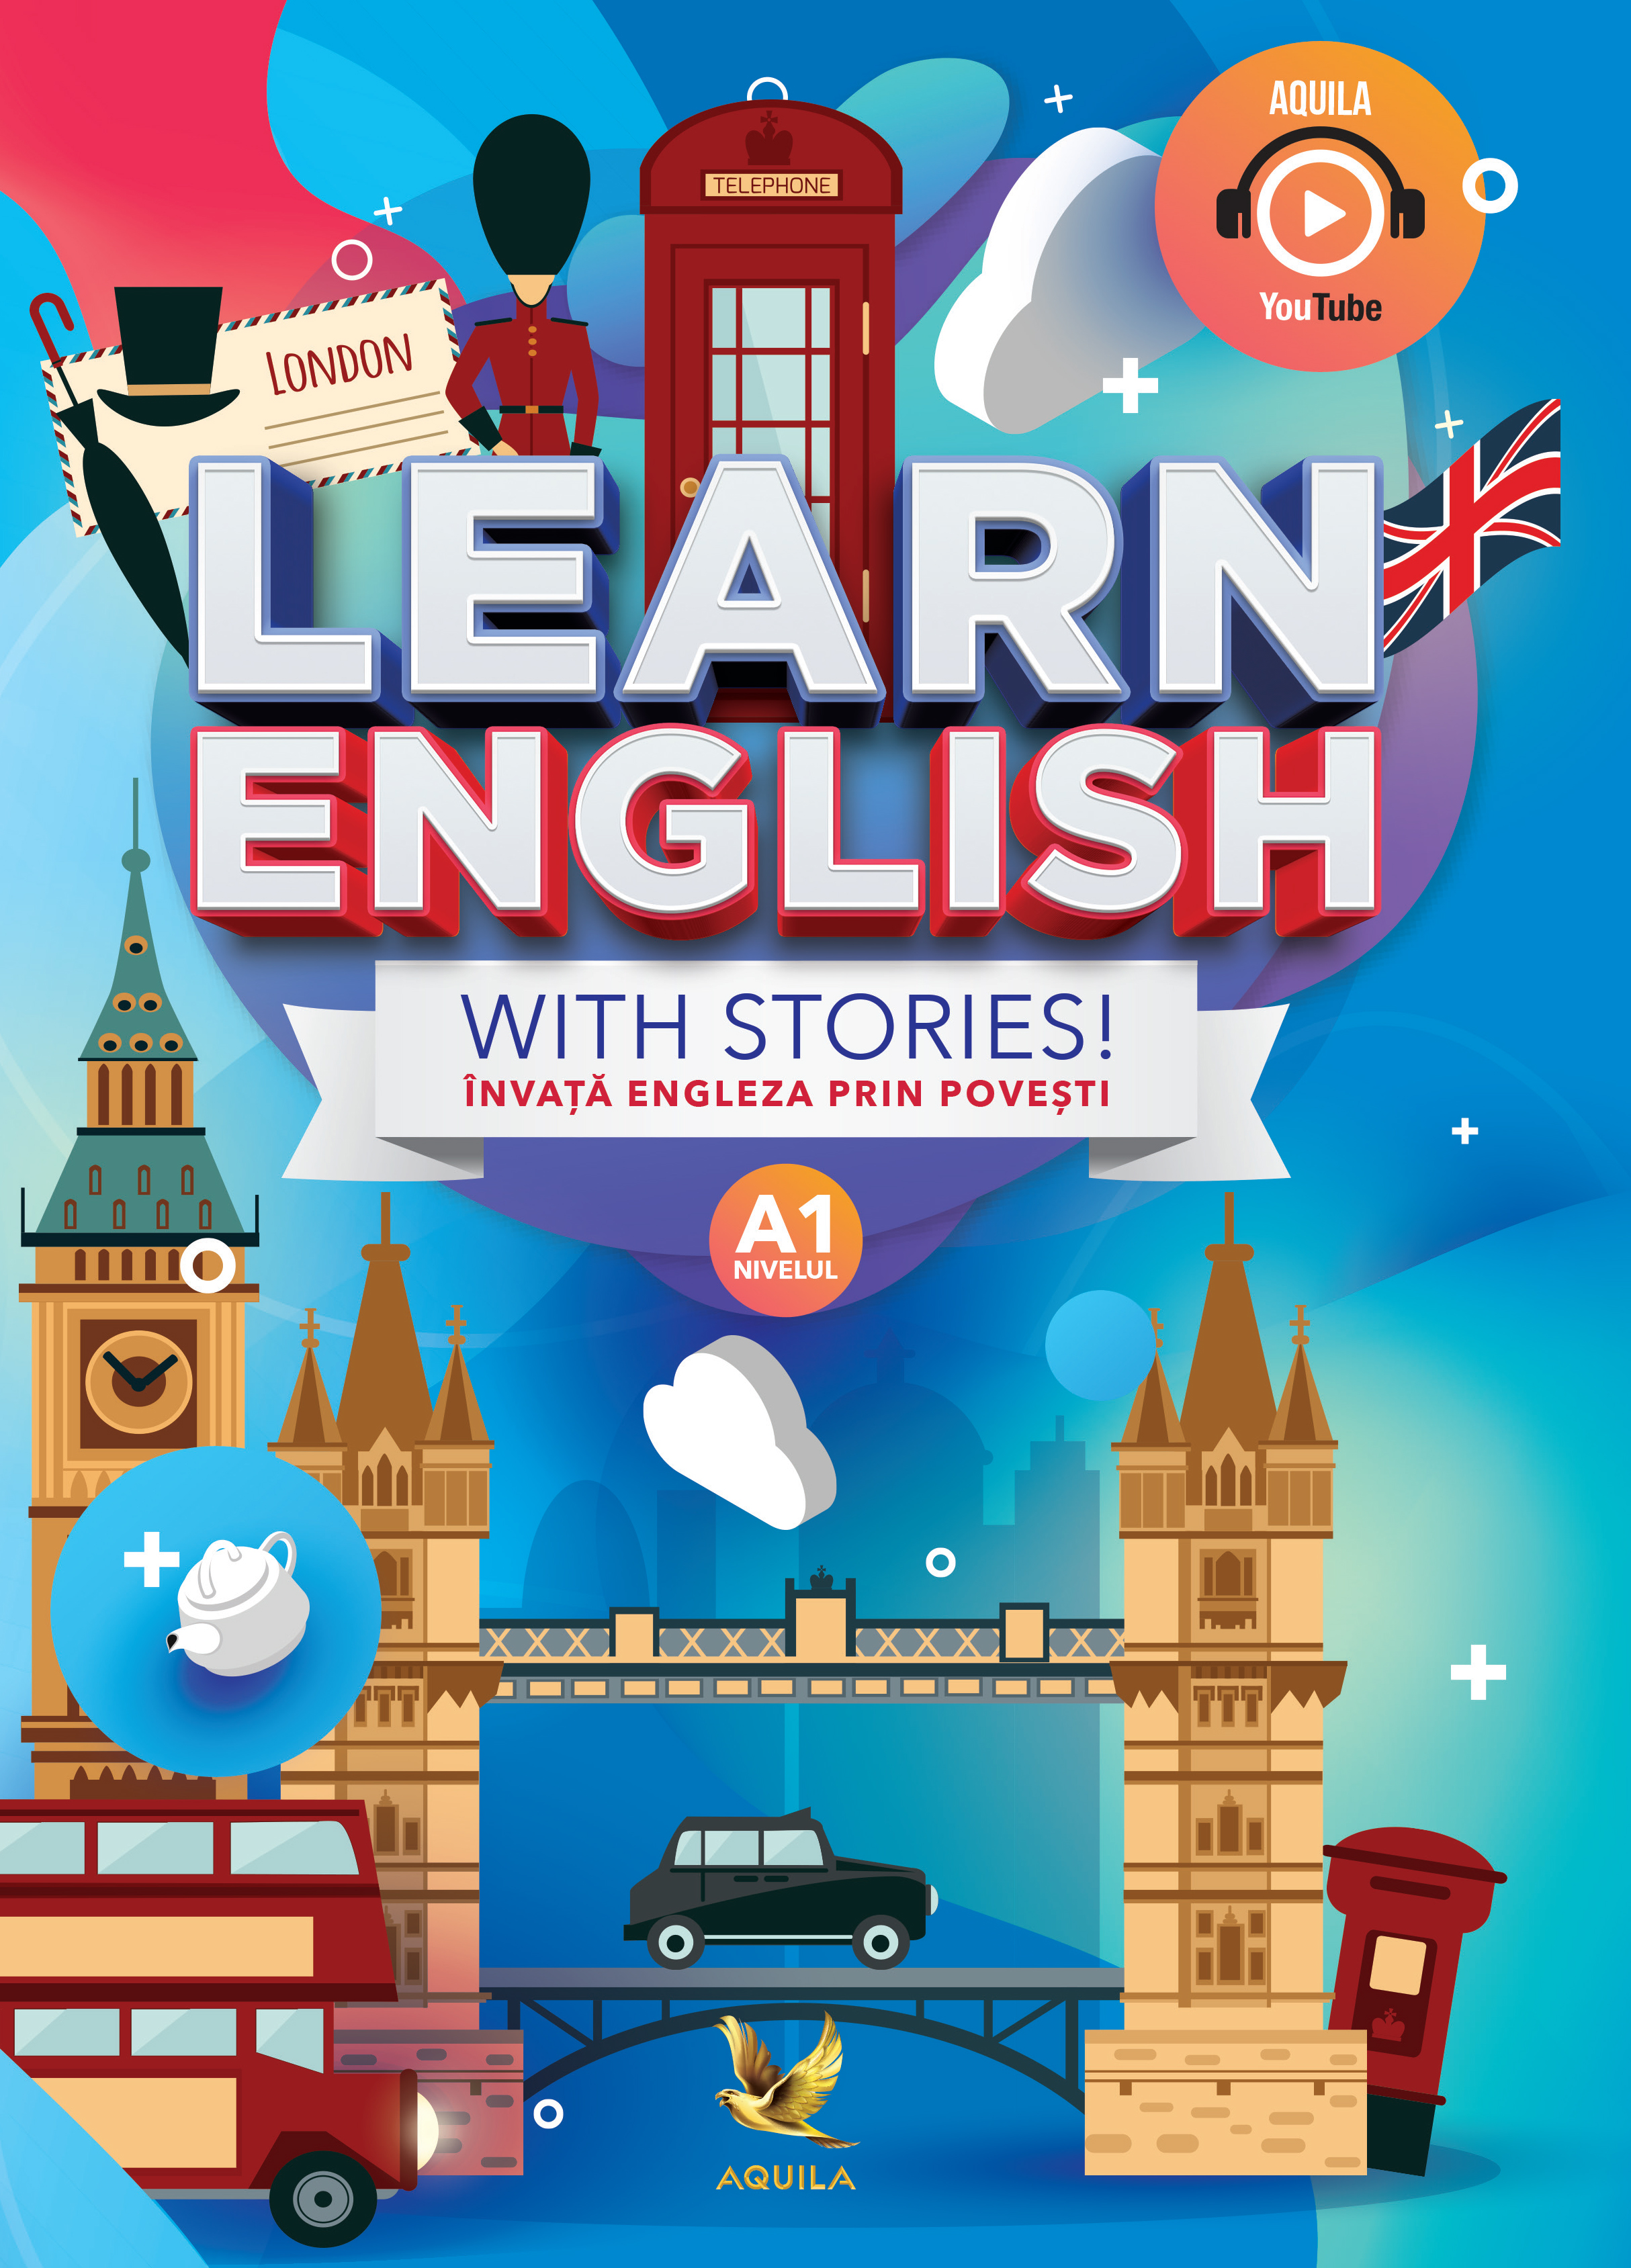  Learn English  with stories